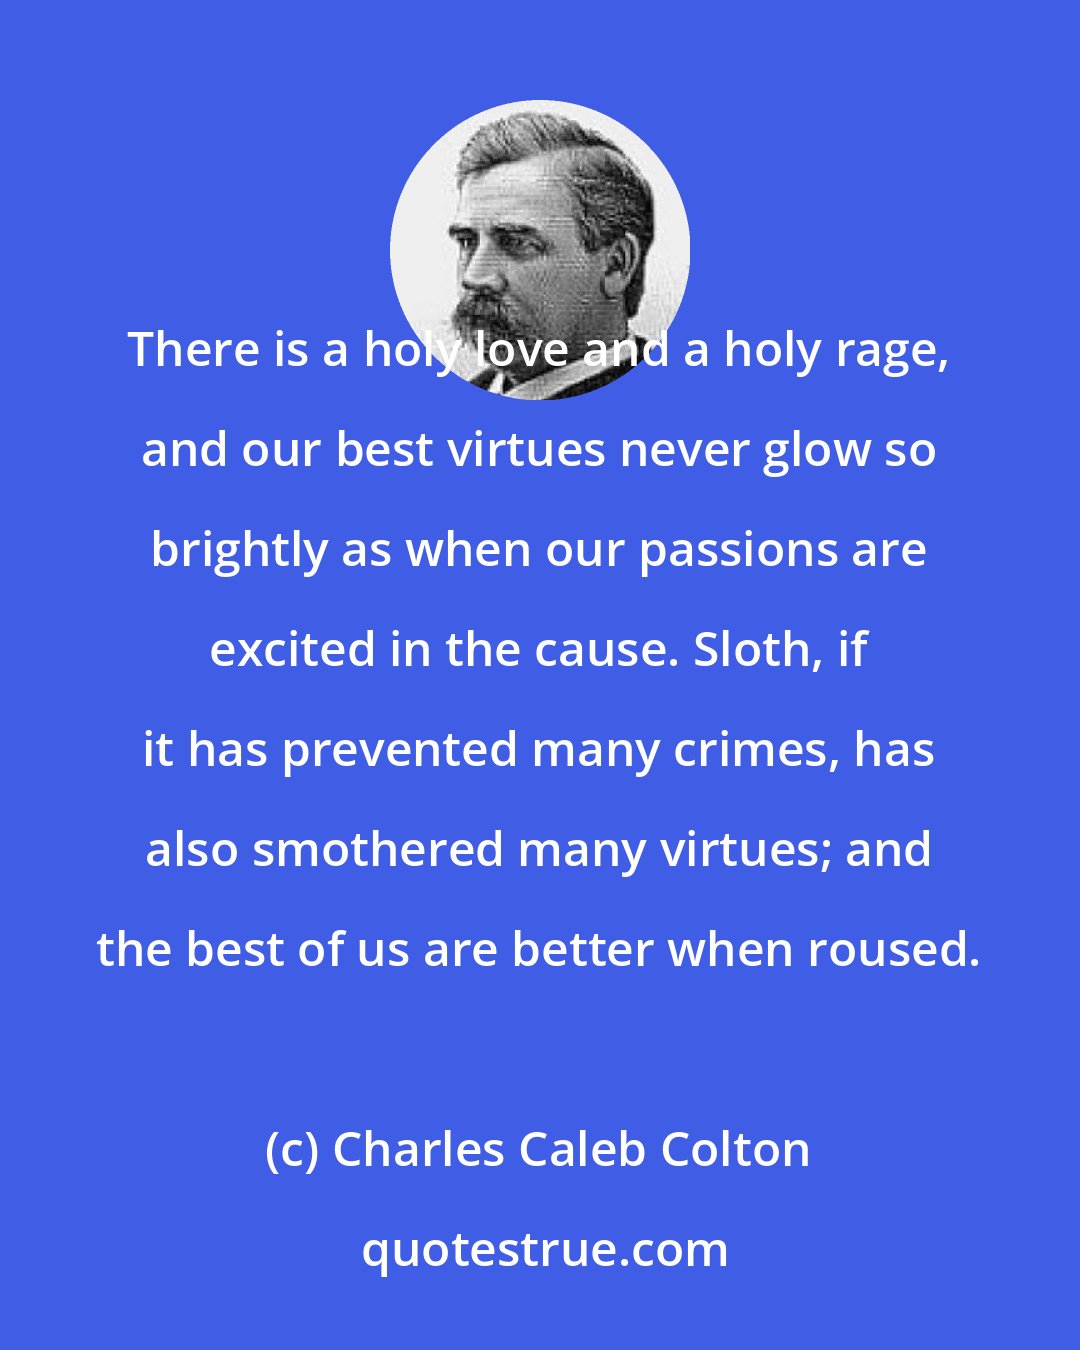 Charles Caleb Colton: There is a holy love and a holy rage, and our best virtues never glow so brightly as when our passions are excited in the cause. Sloth, if it has prevented many crimes, has also smothered many virtues; and the best of us are better when roused.